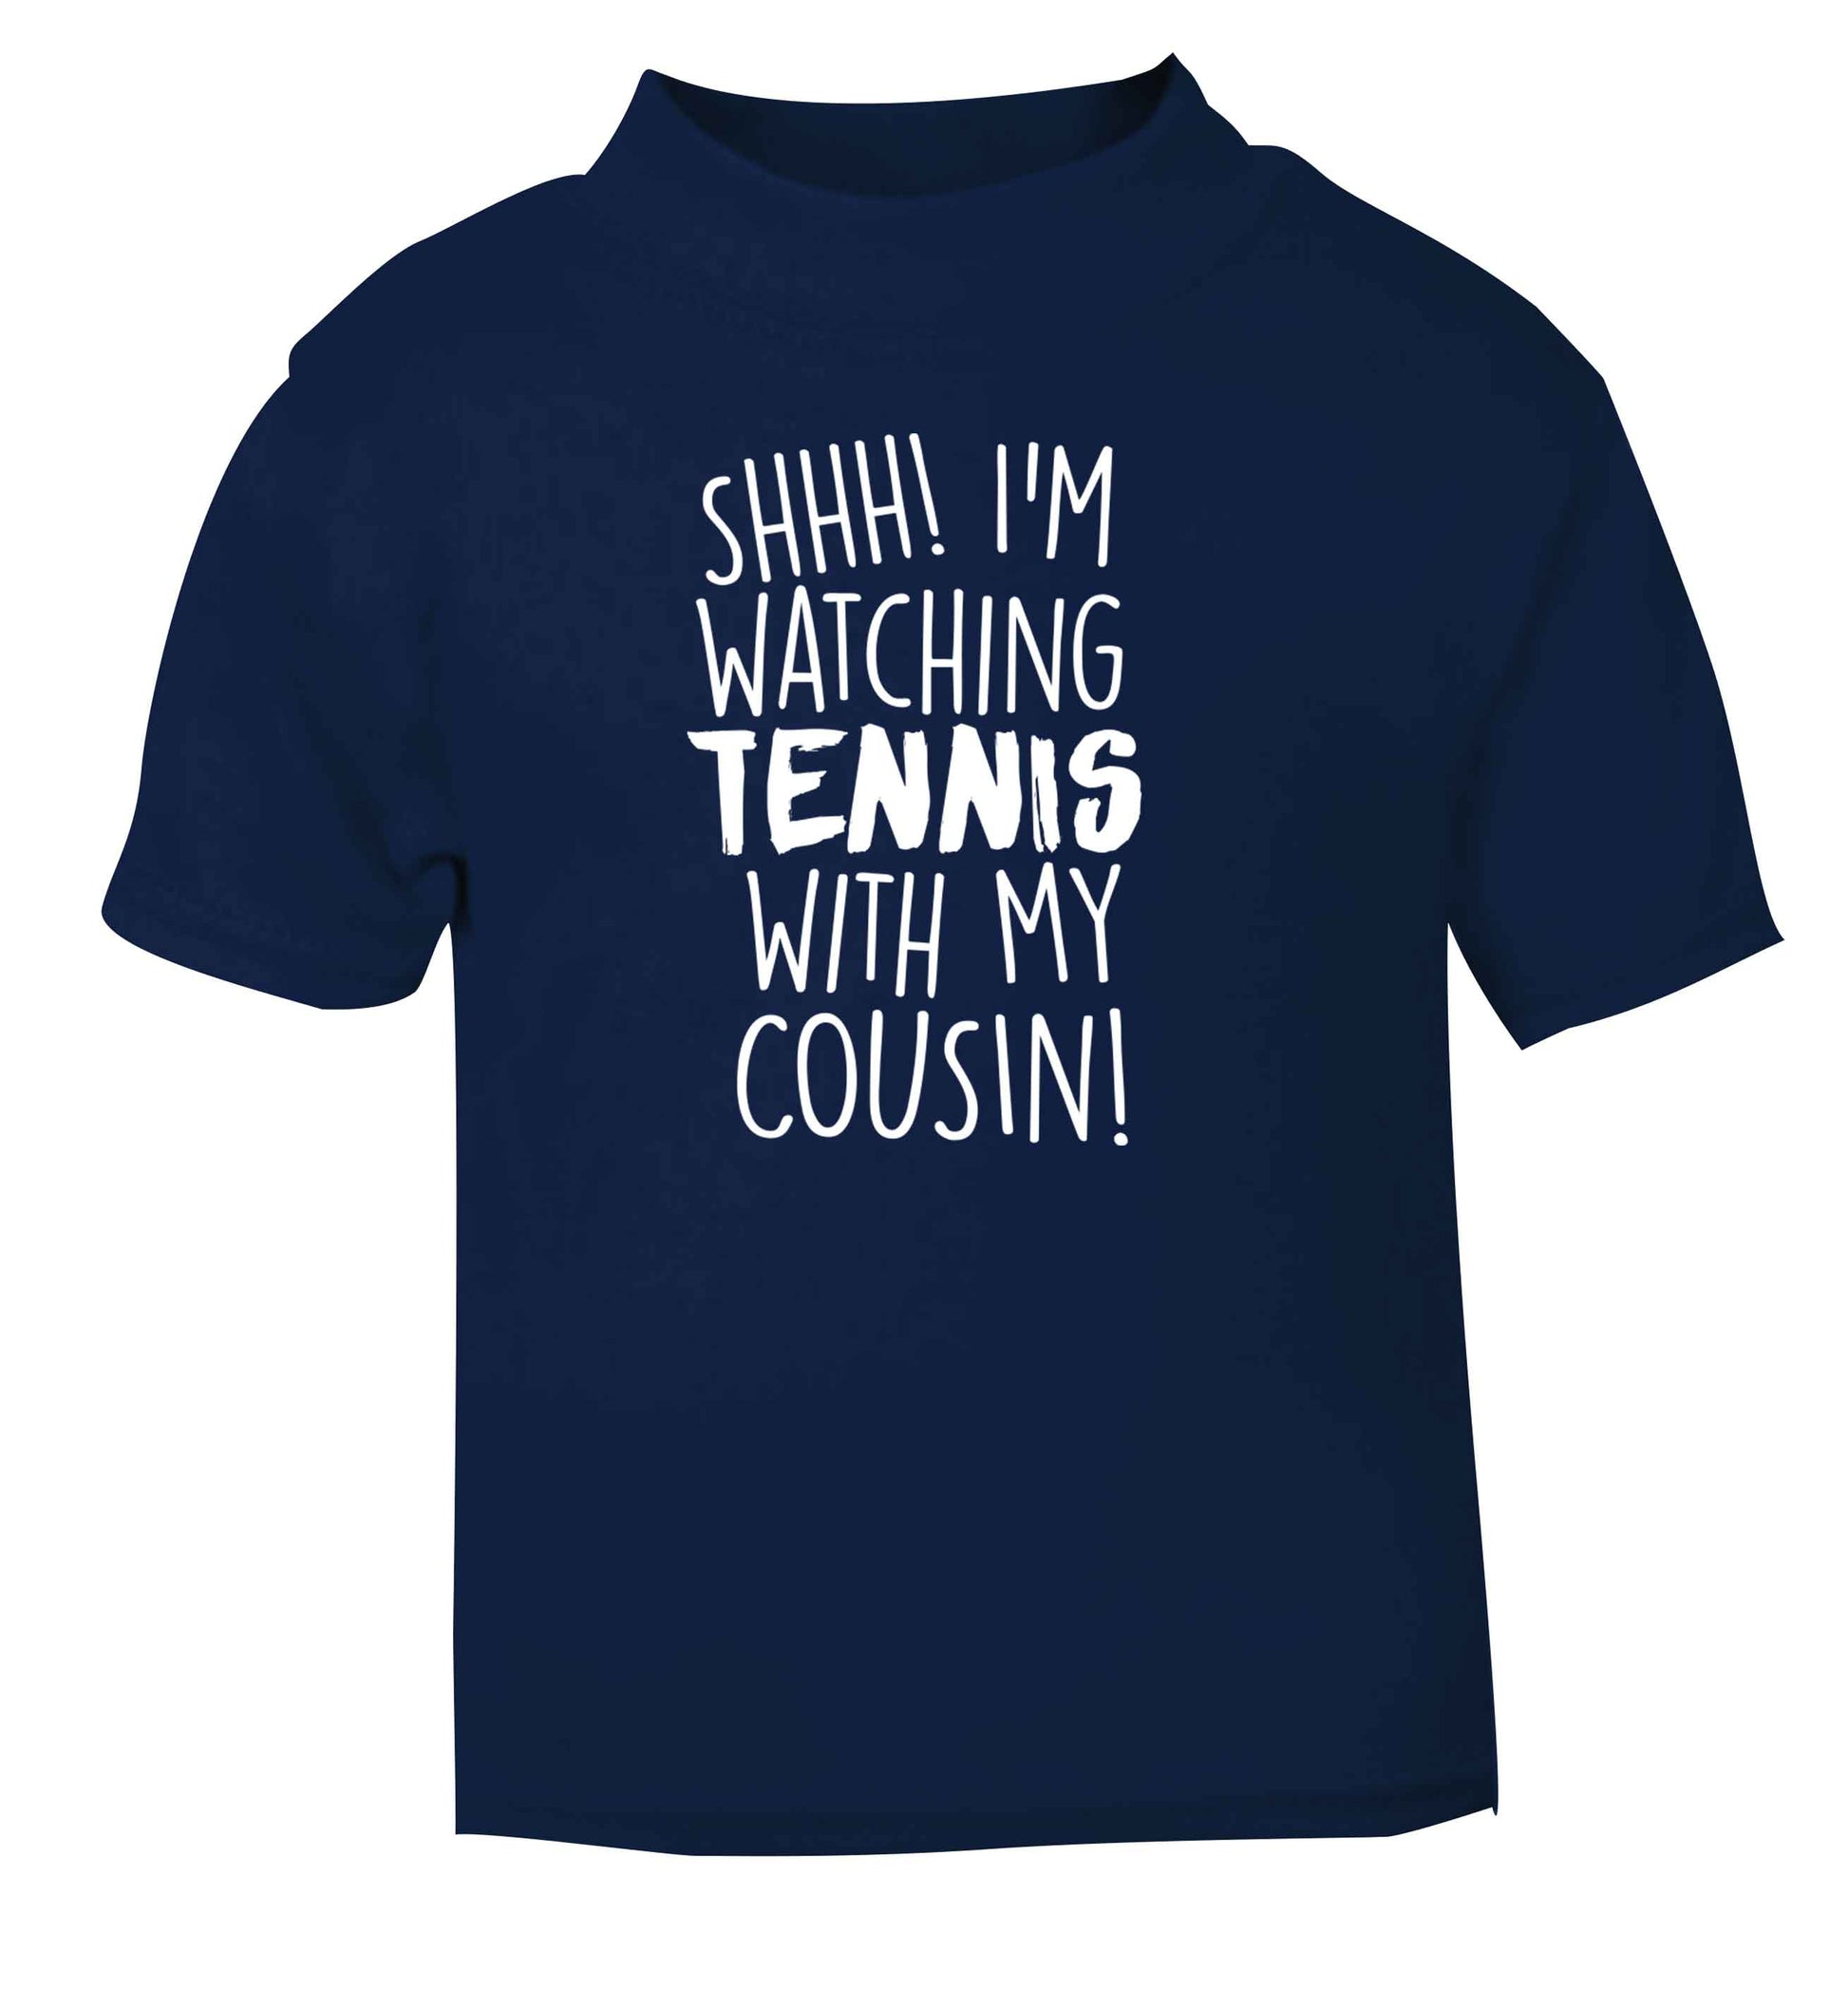 Shh! I'm watching tennis with my cousin! navy Baby Toddler Tshirt 2 Years